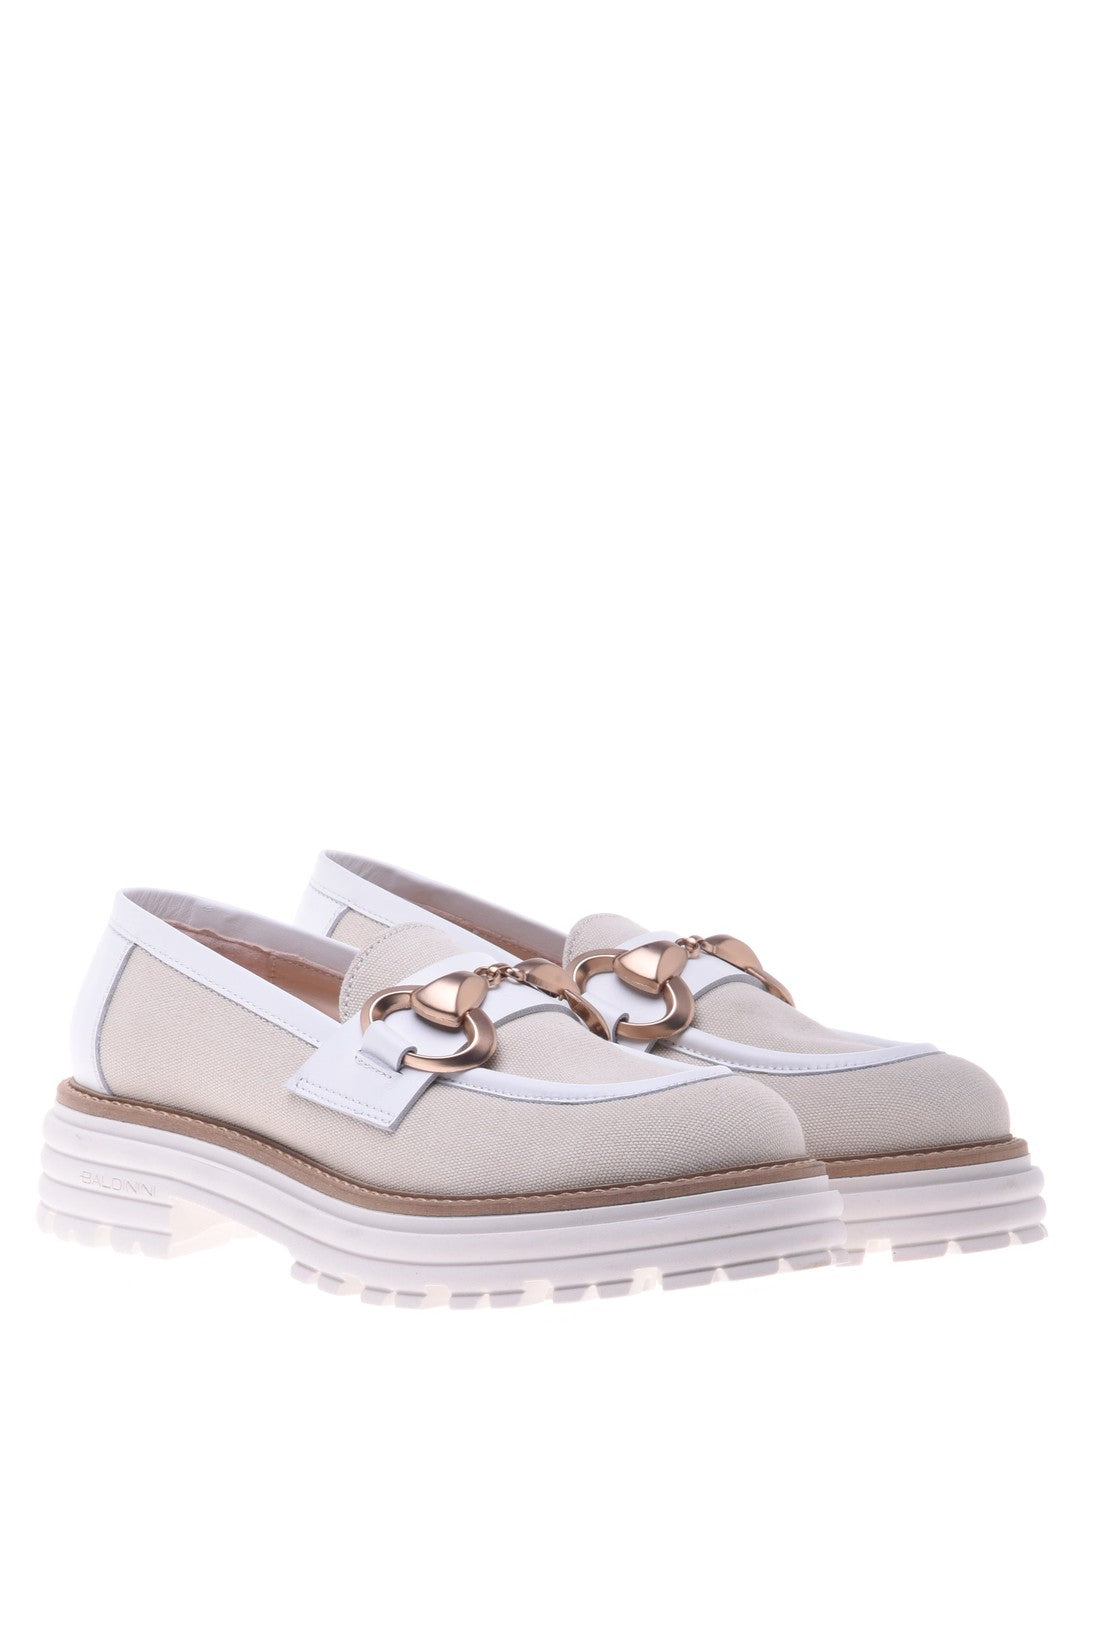 Loafer in white and beige shiny calfskin